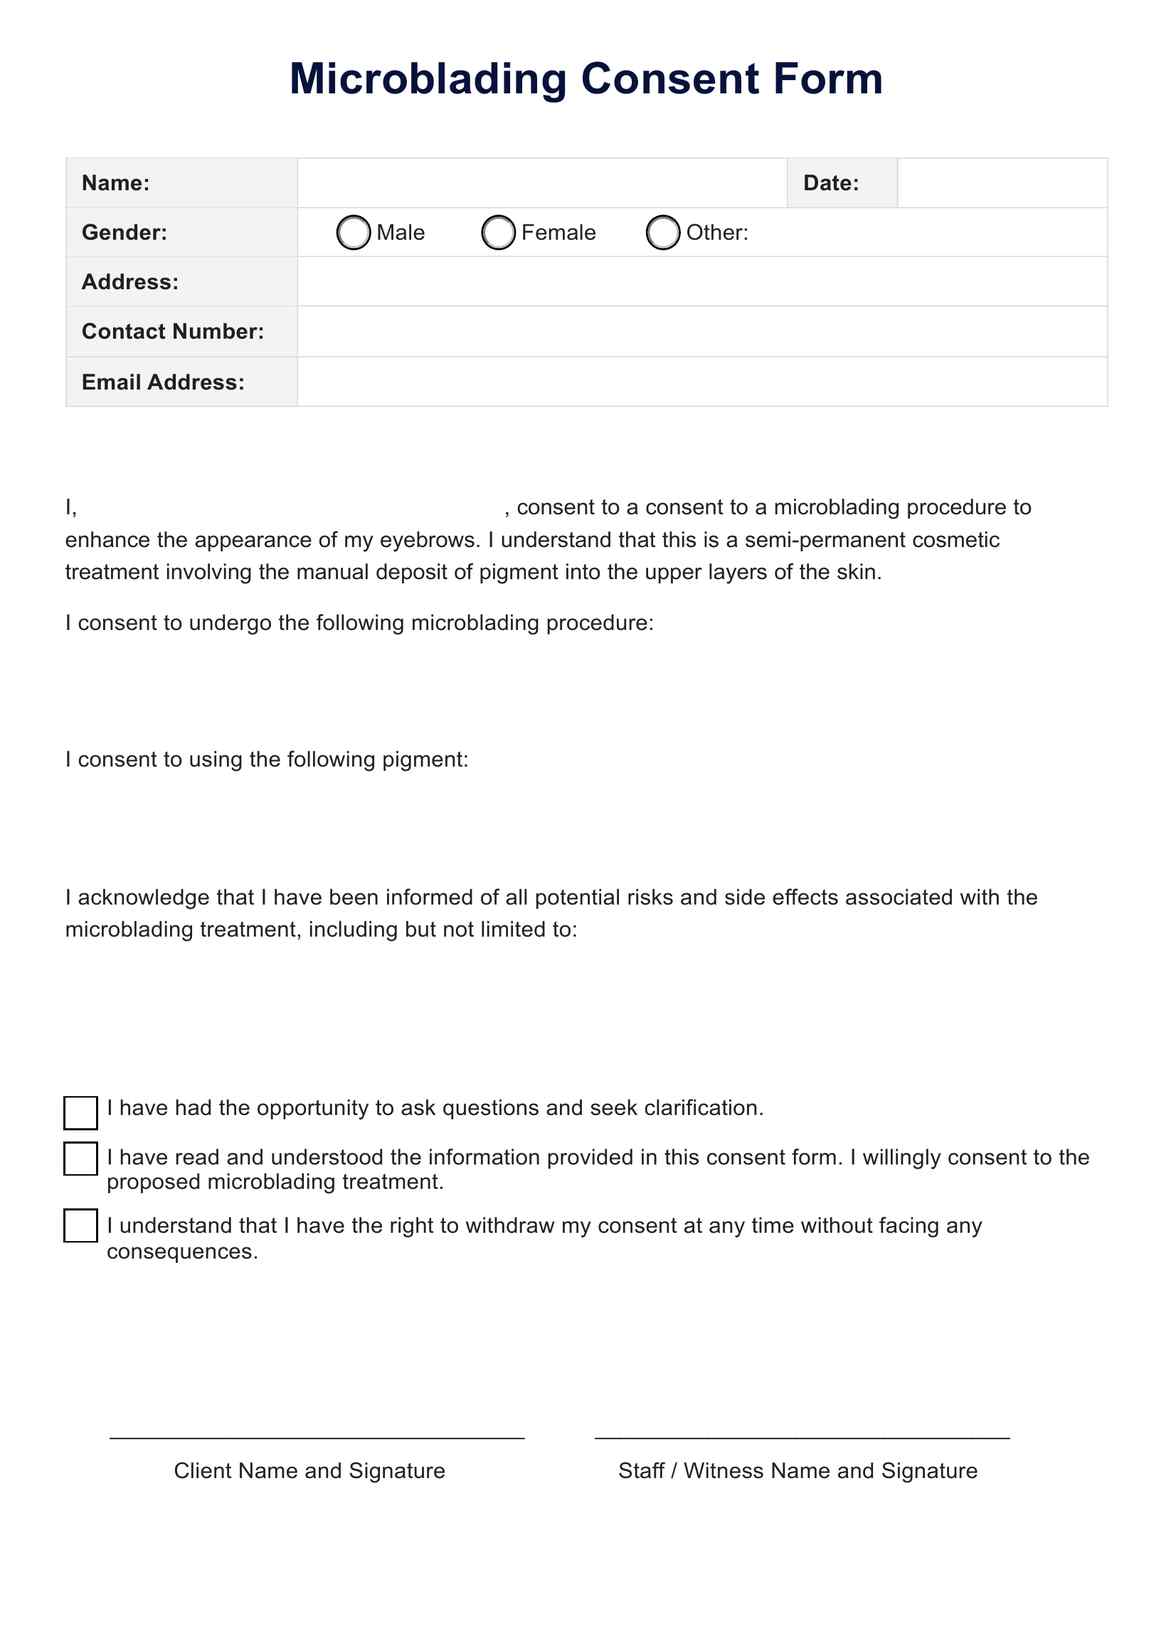 Microblading Consent Form PDF Example